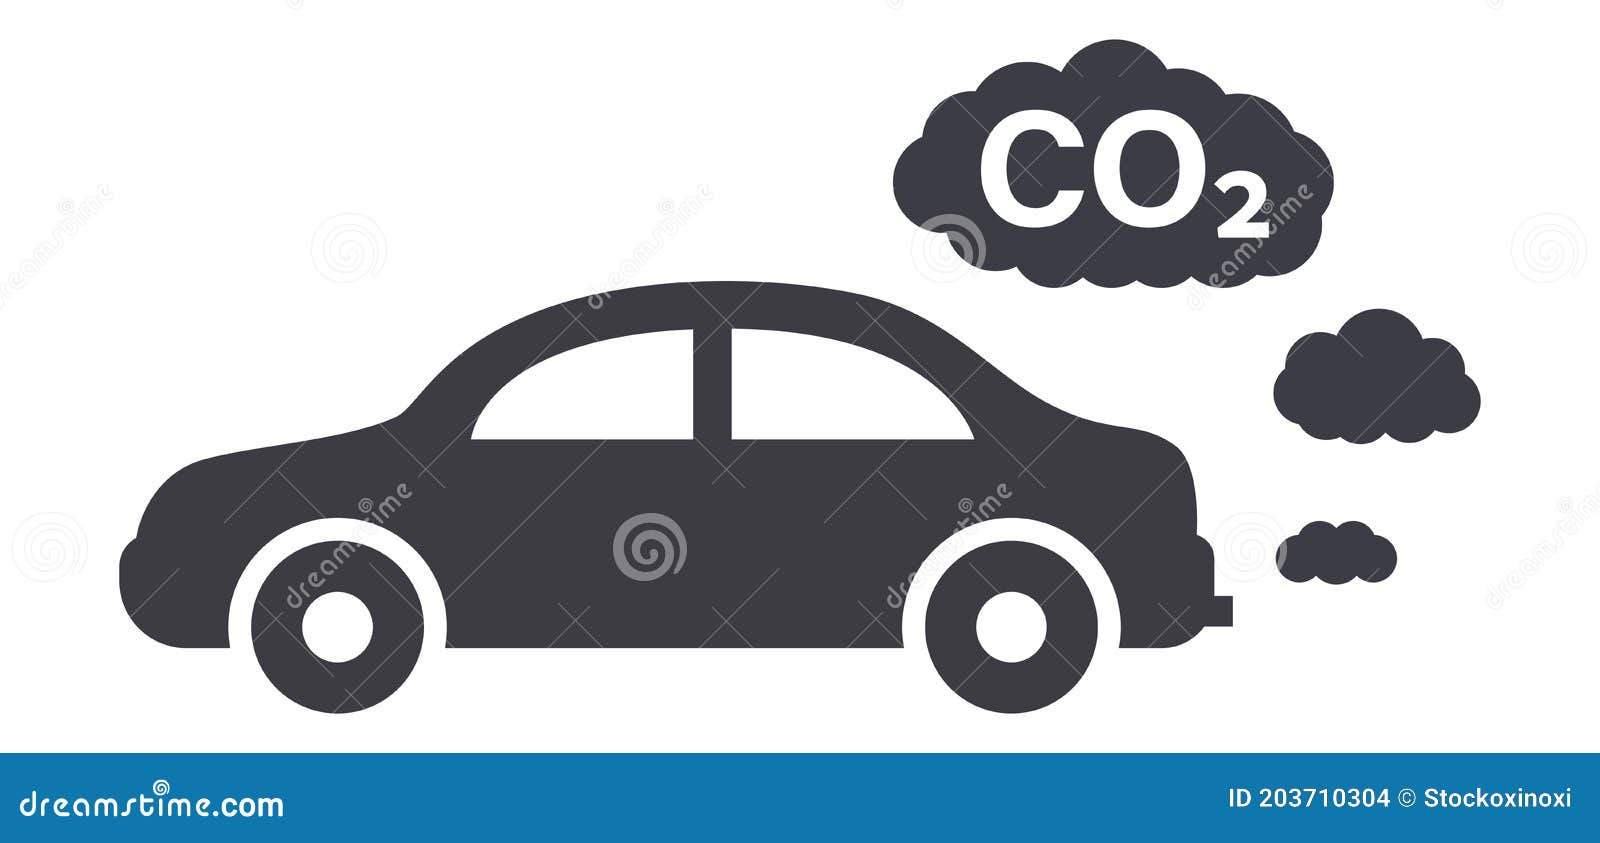 Car CO2 Clouds Symbol Traffic Exhaust Pollution Icon Stock Vector ...